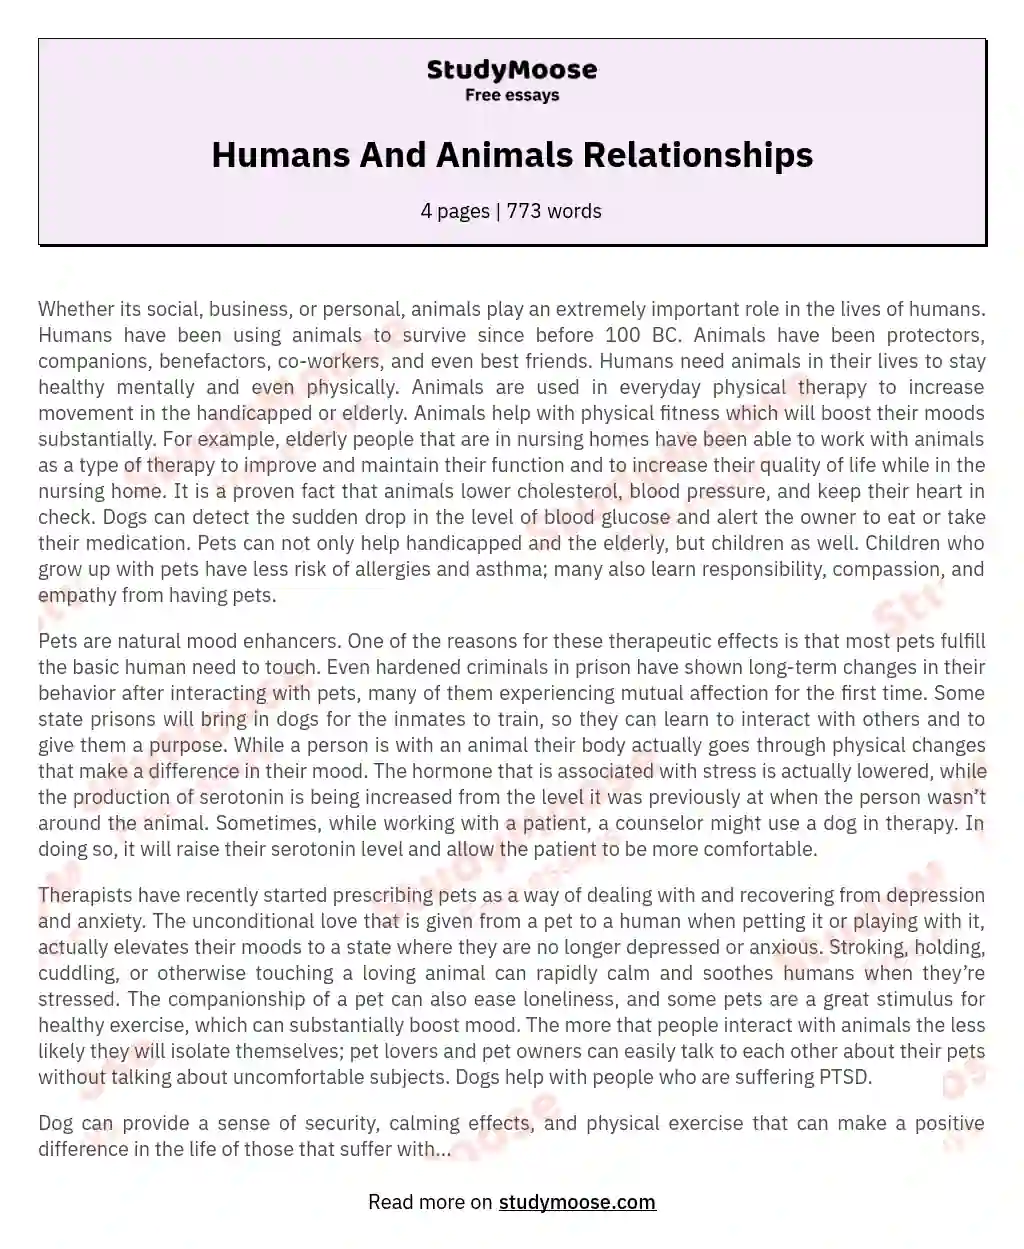 Humans And Animals Relationships essay